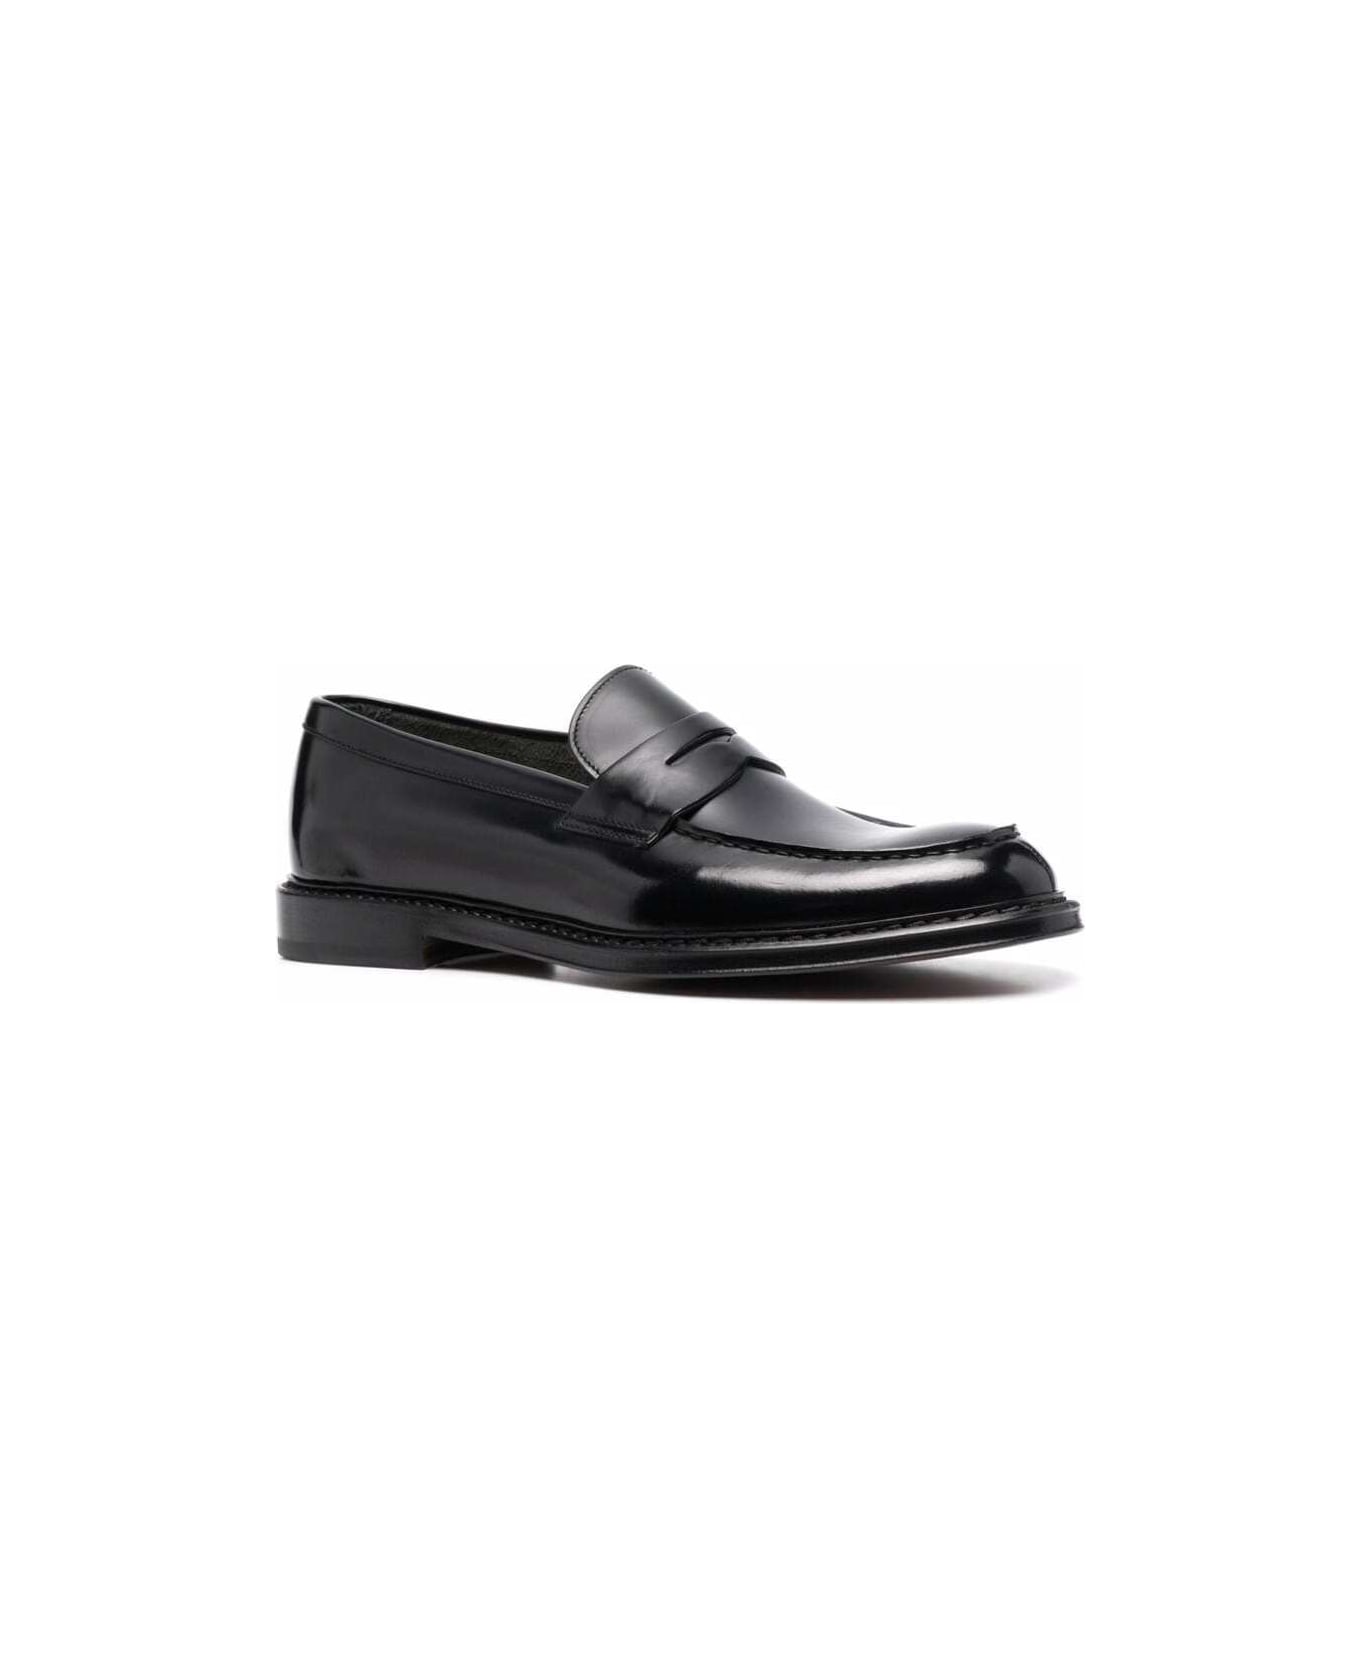 Doucal's Black Slip-on Loafers With Round Toe In Patent Leather Man - Nero ローファー＆デッキシューズ